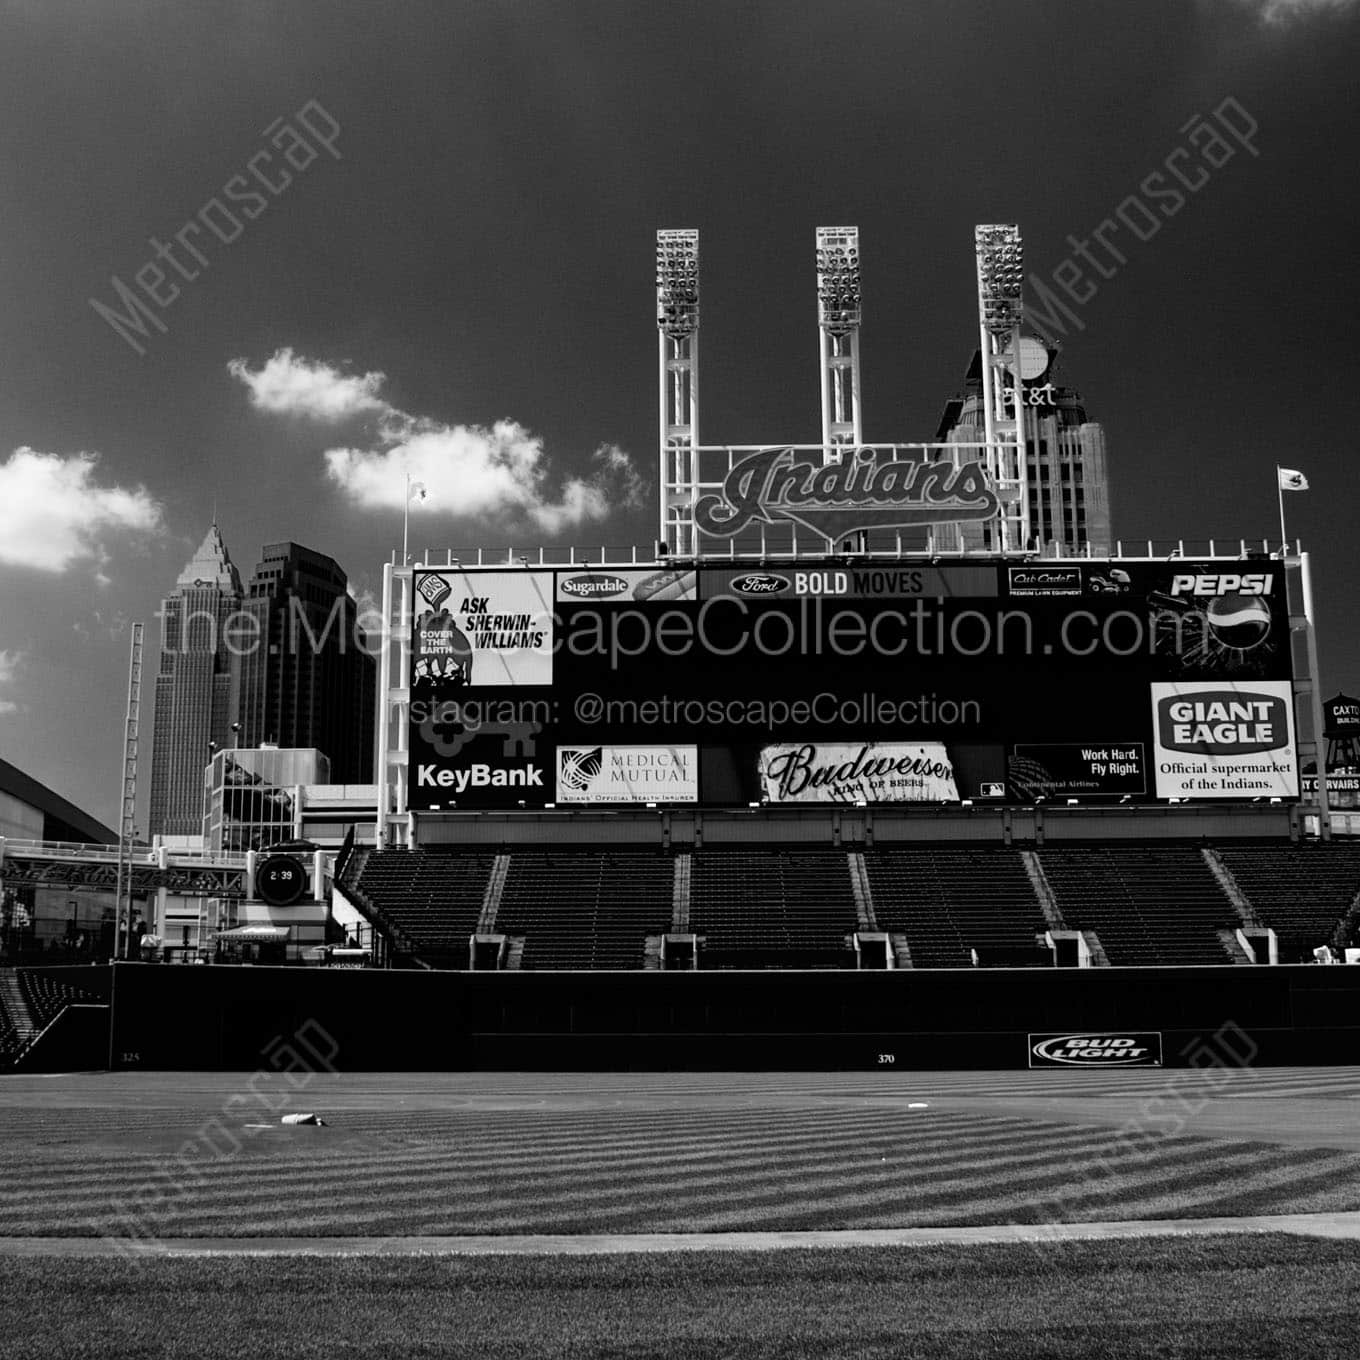 jacobs field first base dugout Black & White Office Art